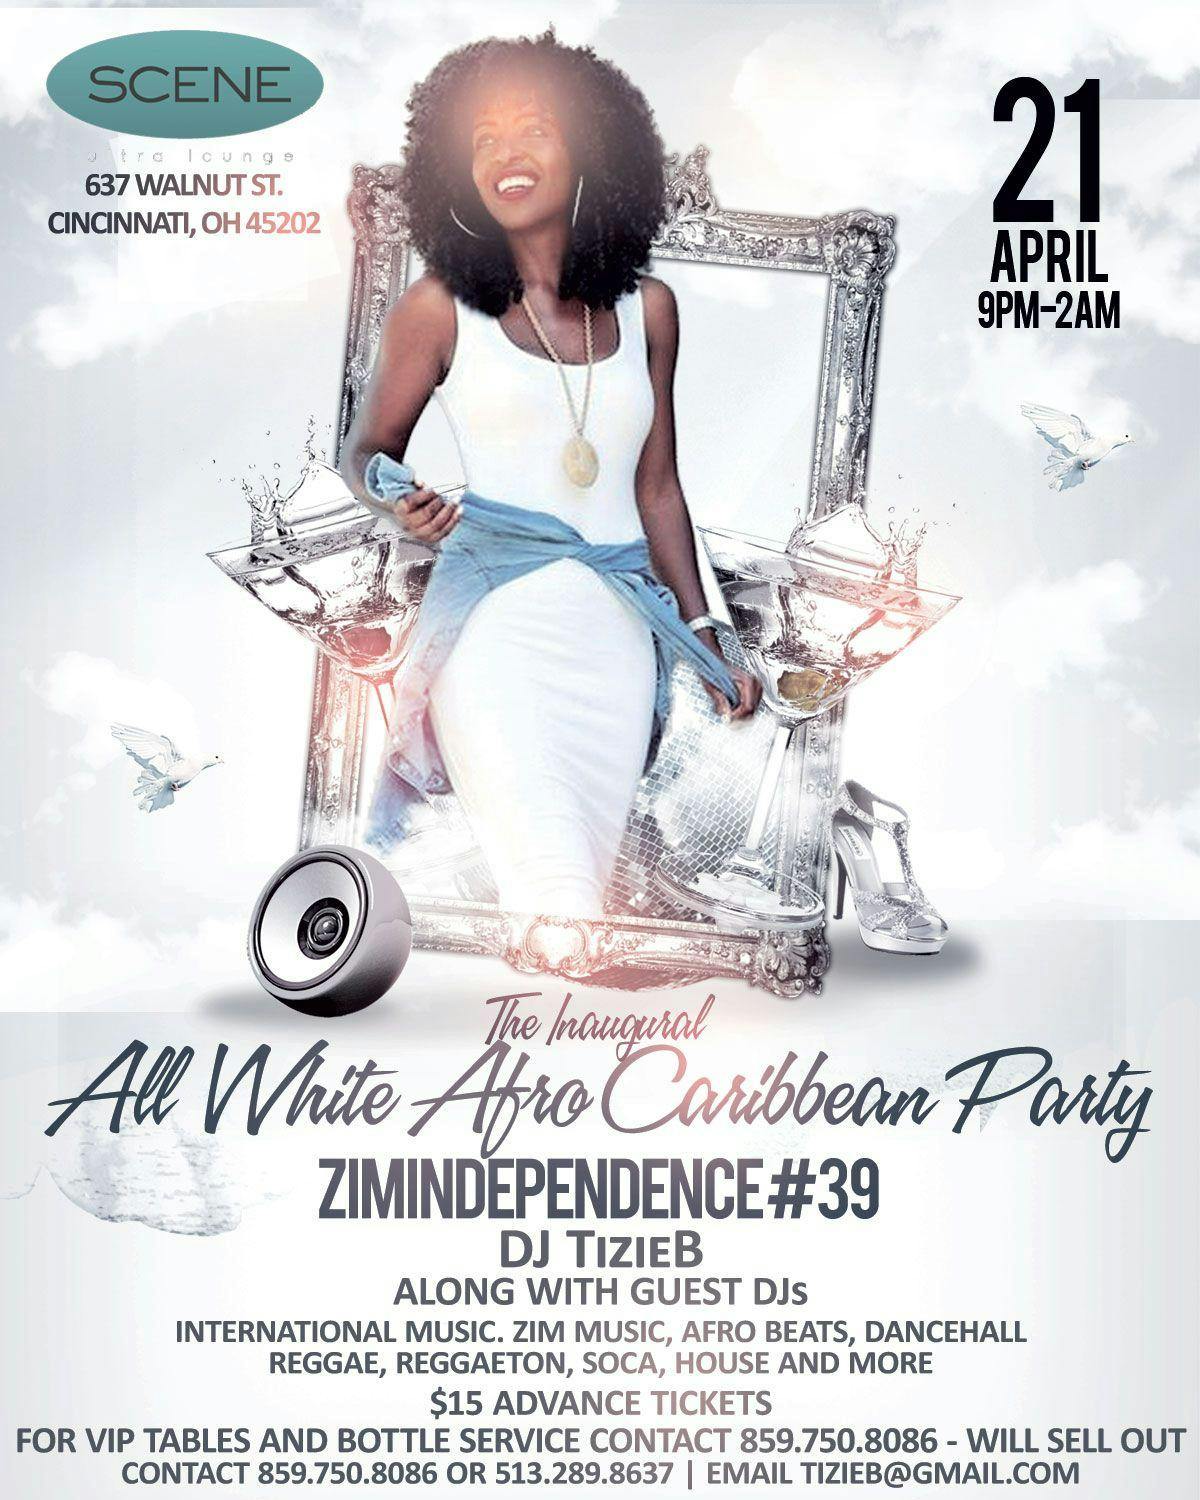 All White Afro Caribbean Party